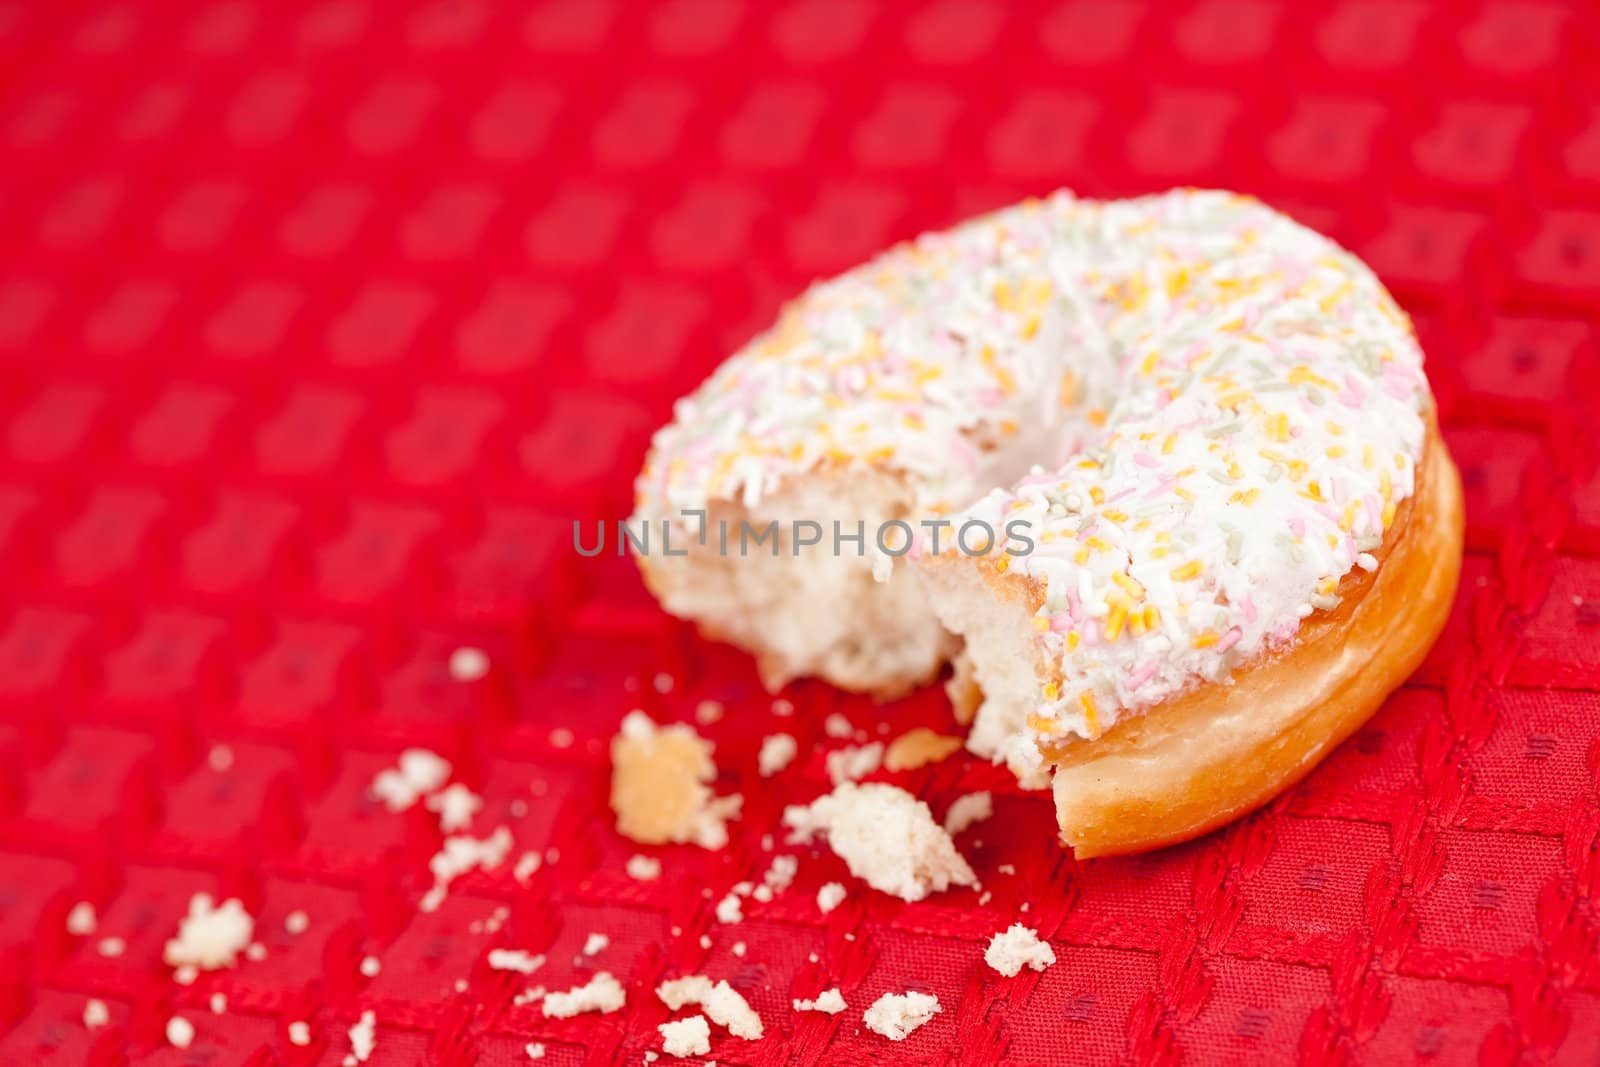 Half eaten doughnut with whipped cream on a red tablecloth